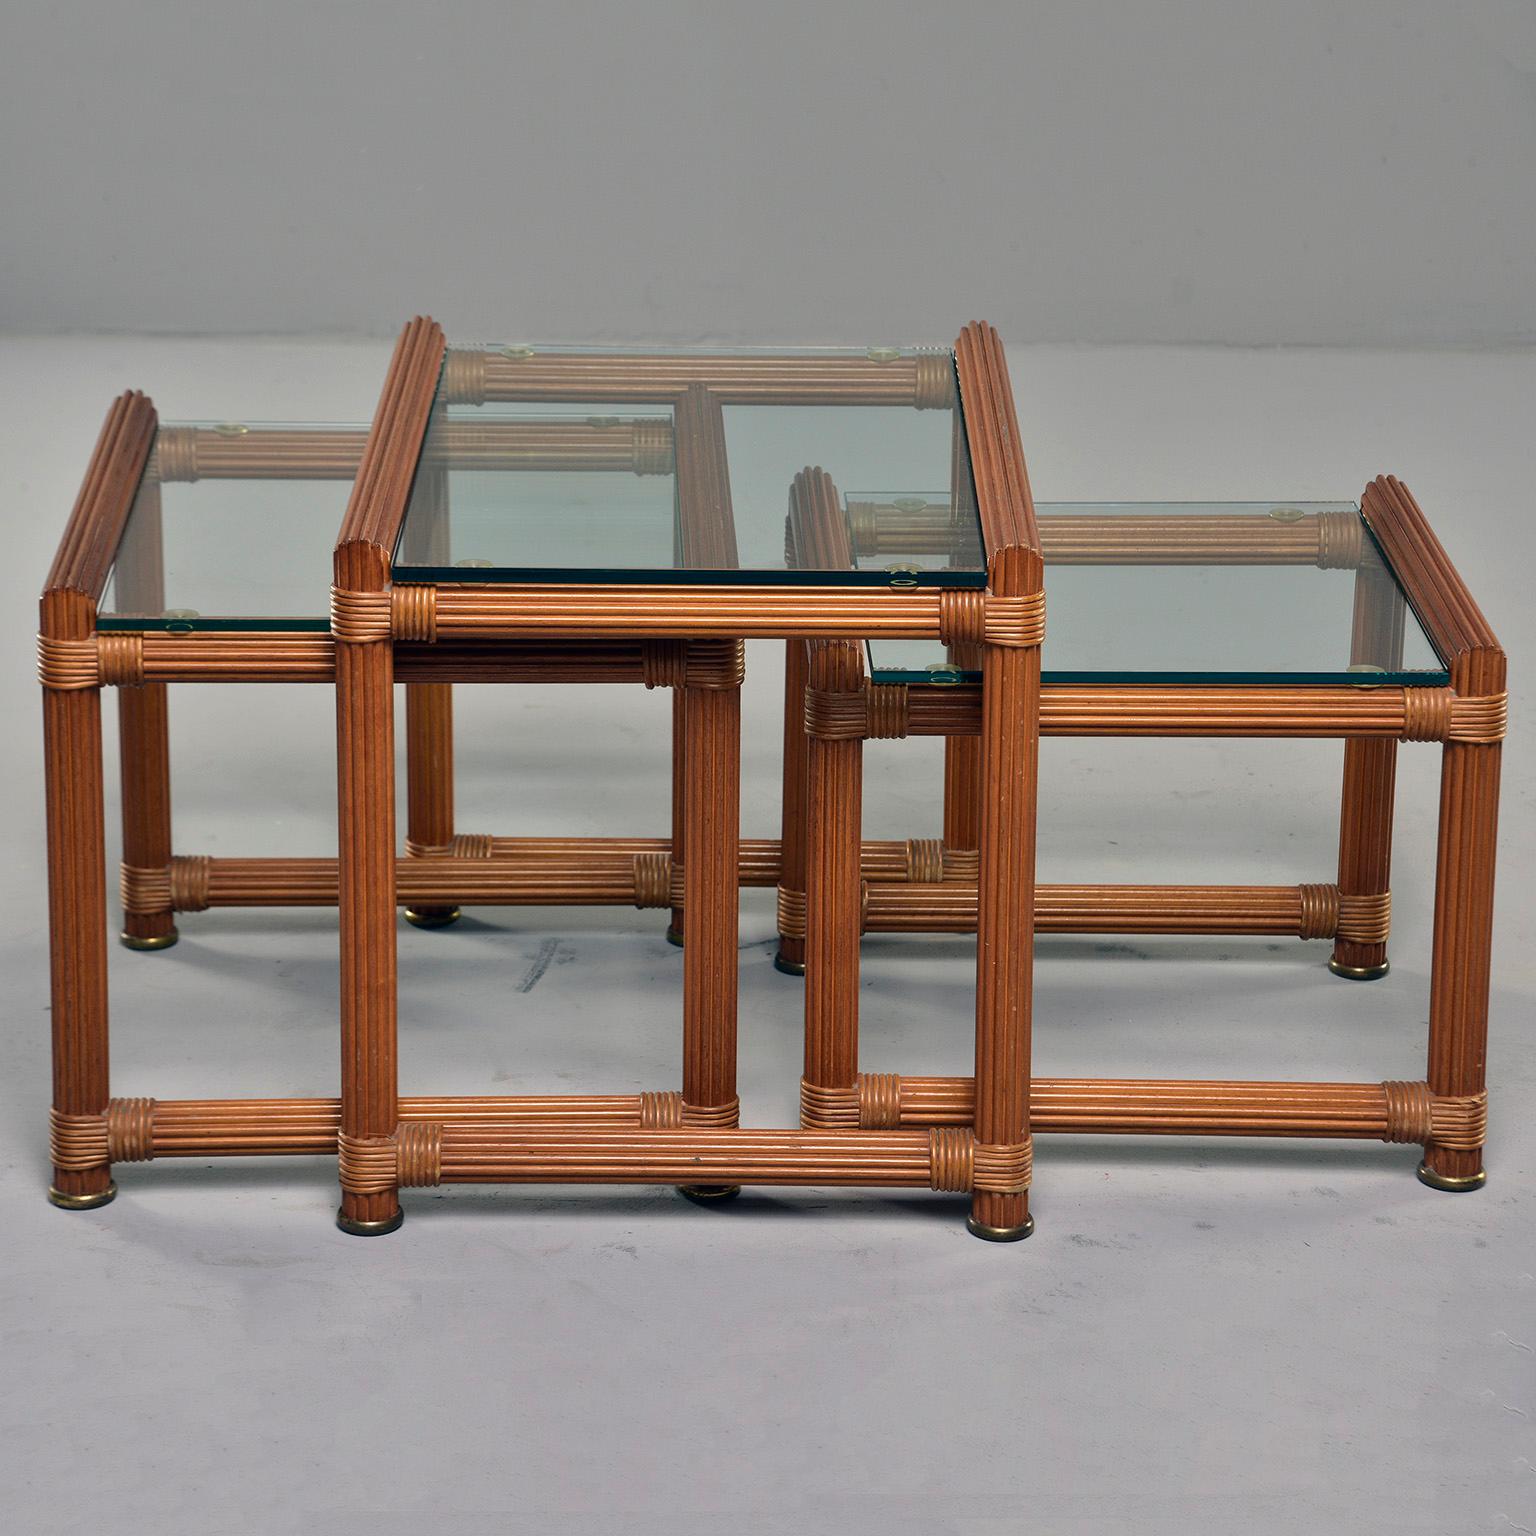 European Set of Three Midcentury Reeded Wood and Glass Topped Nesting Tables